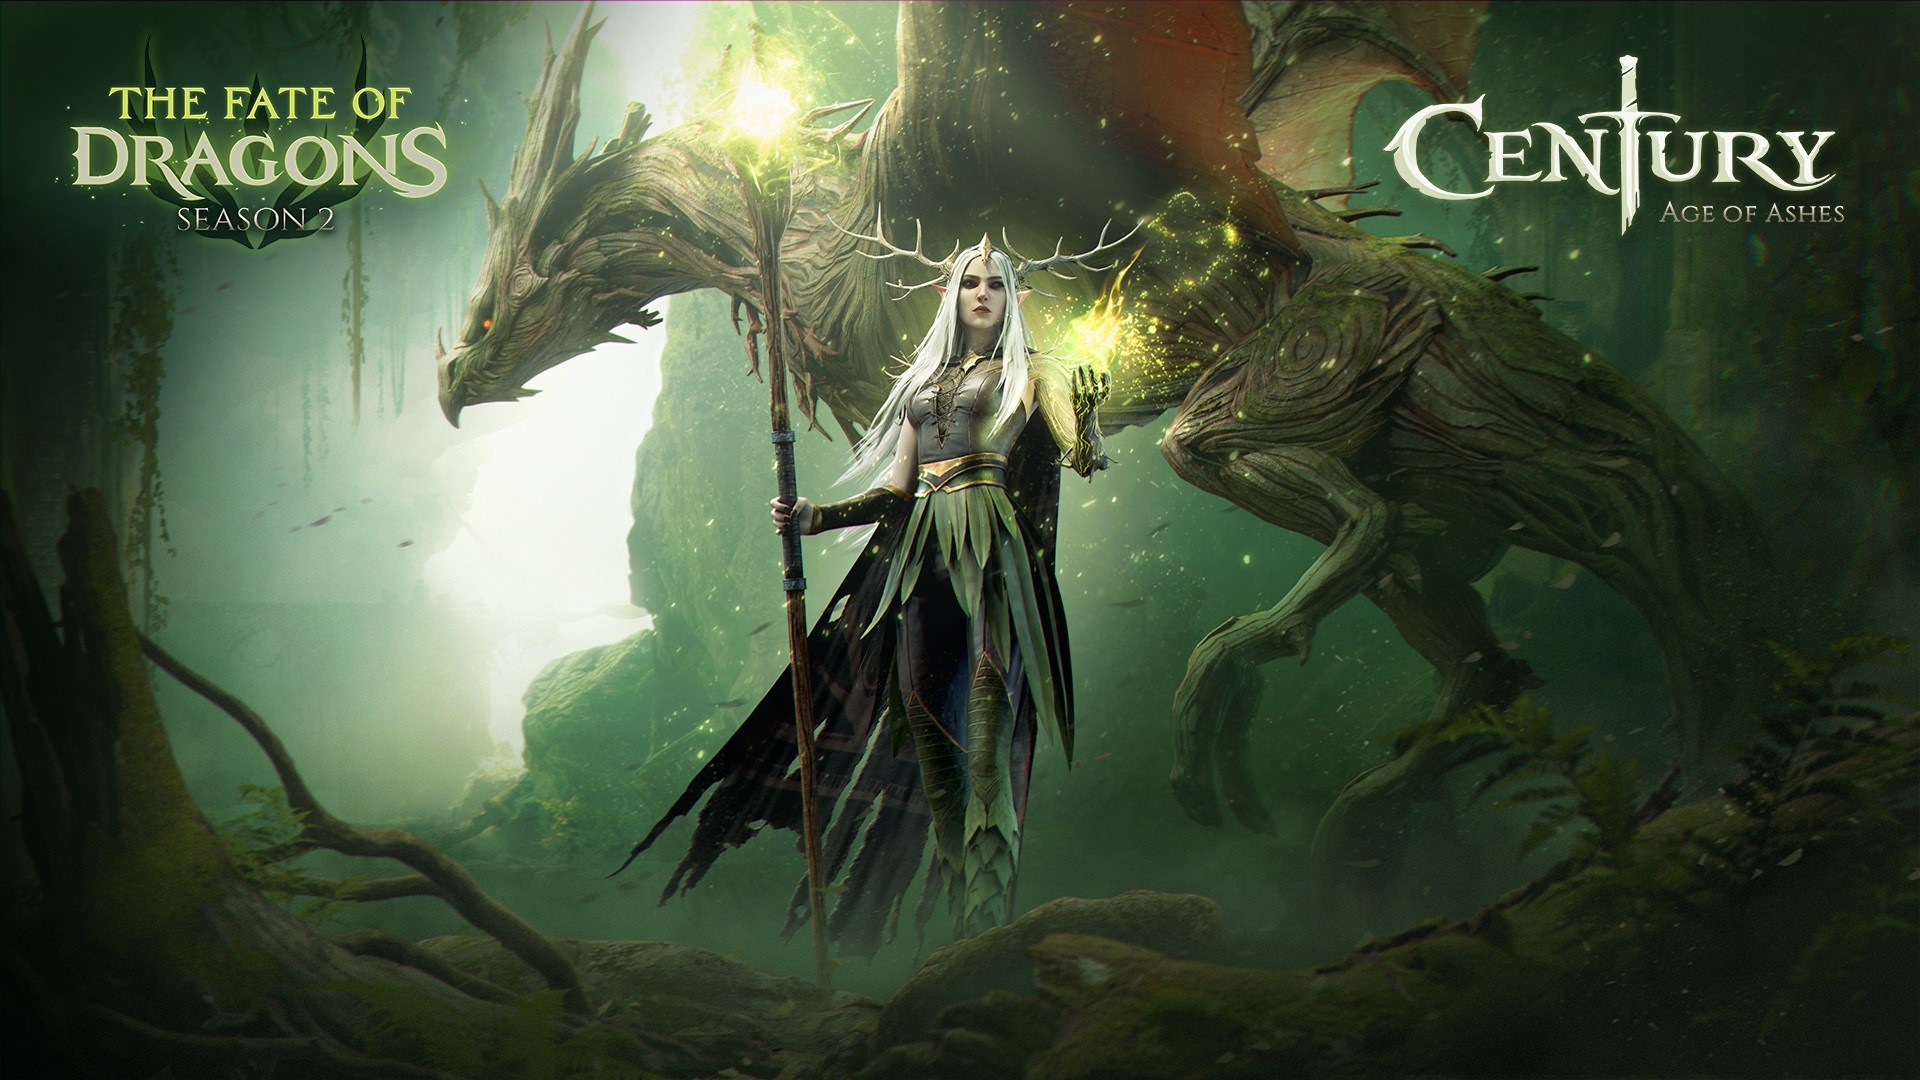 Century-Age-of-Ashes-Saison-2-The-Fate-of-Dragons-startet-heute